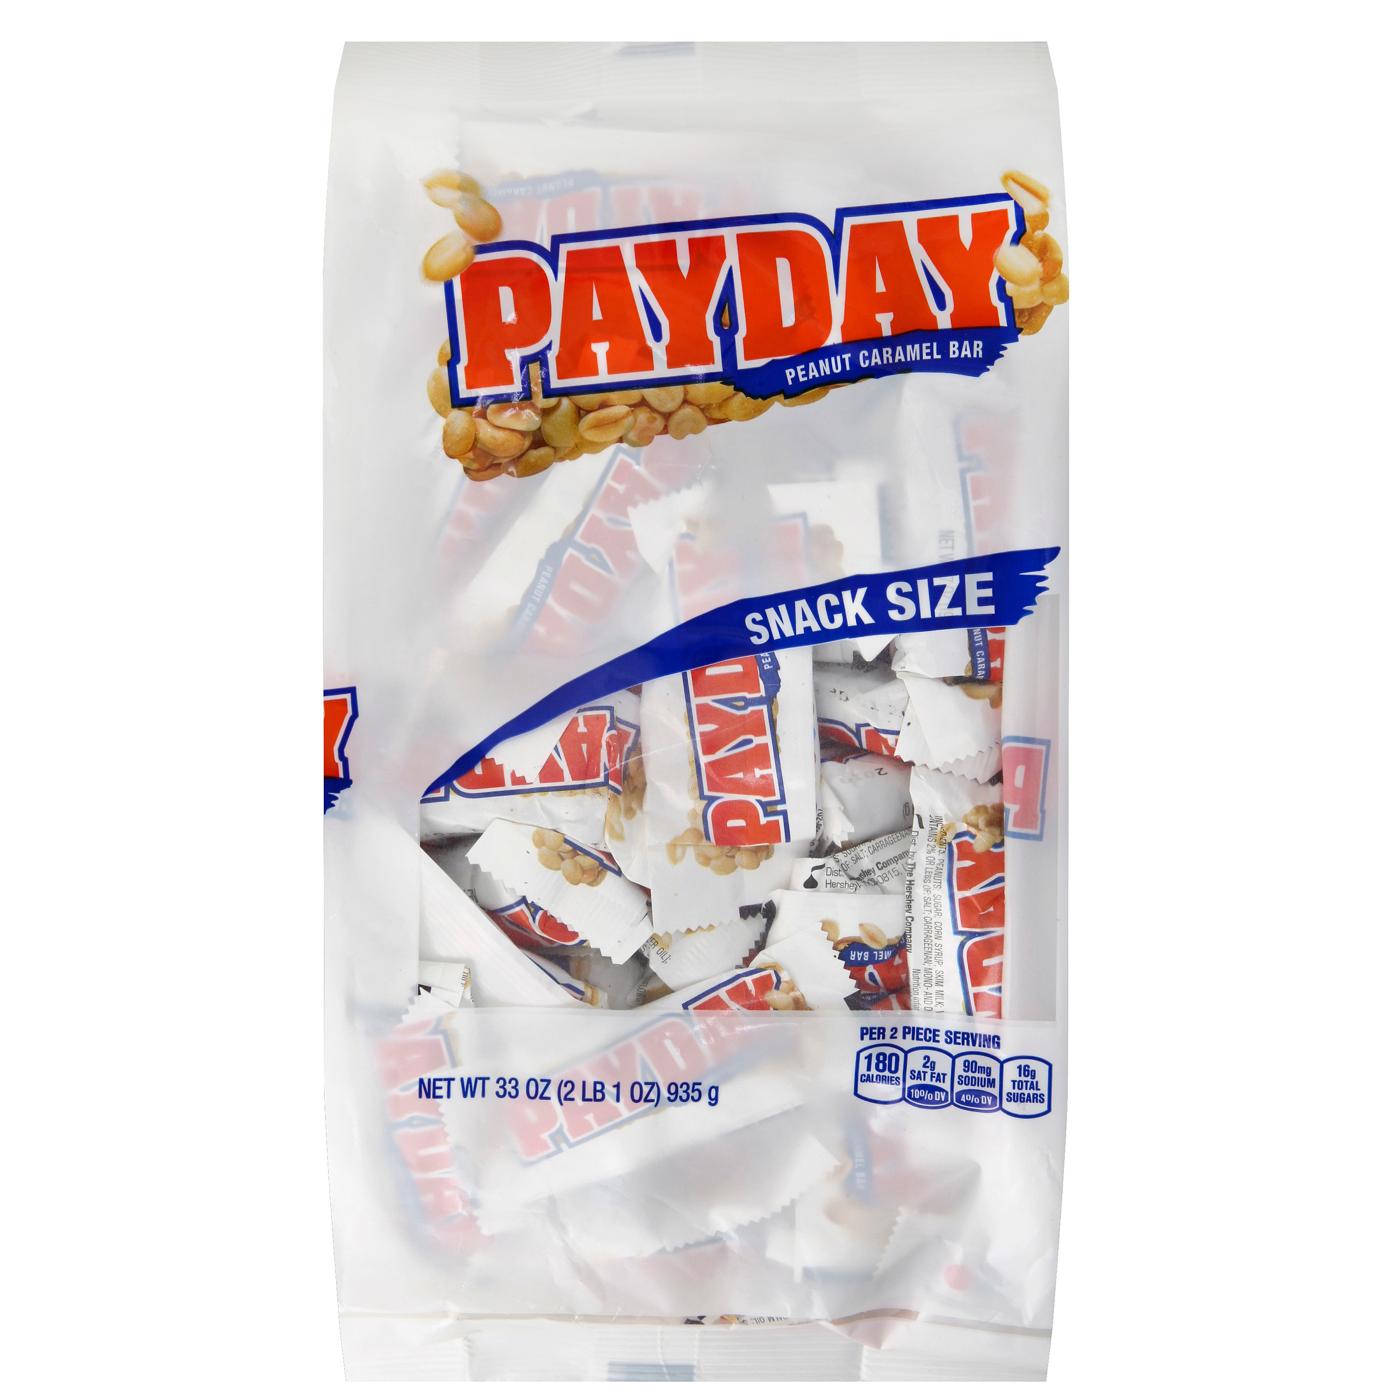 Payday Peanut Caramel Snack Size Candy Bars; image 1 of 8